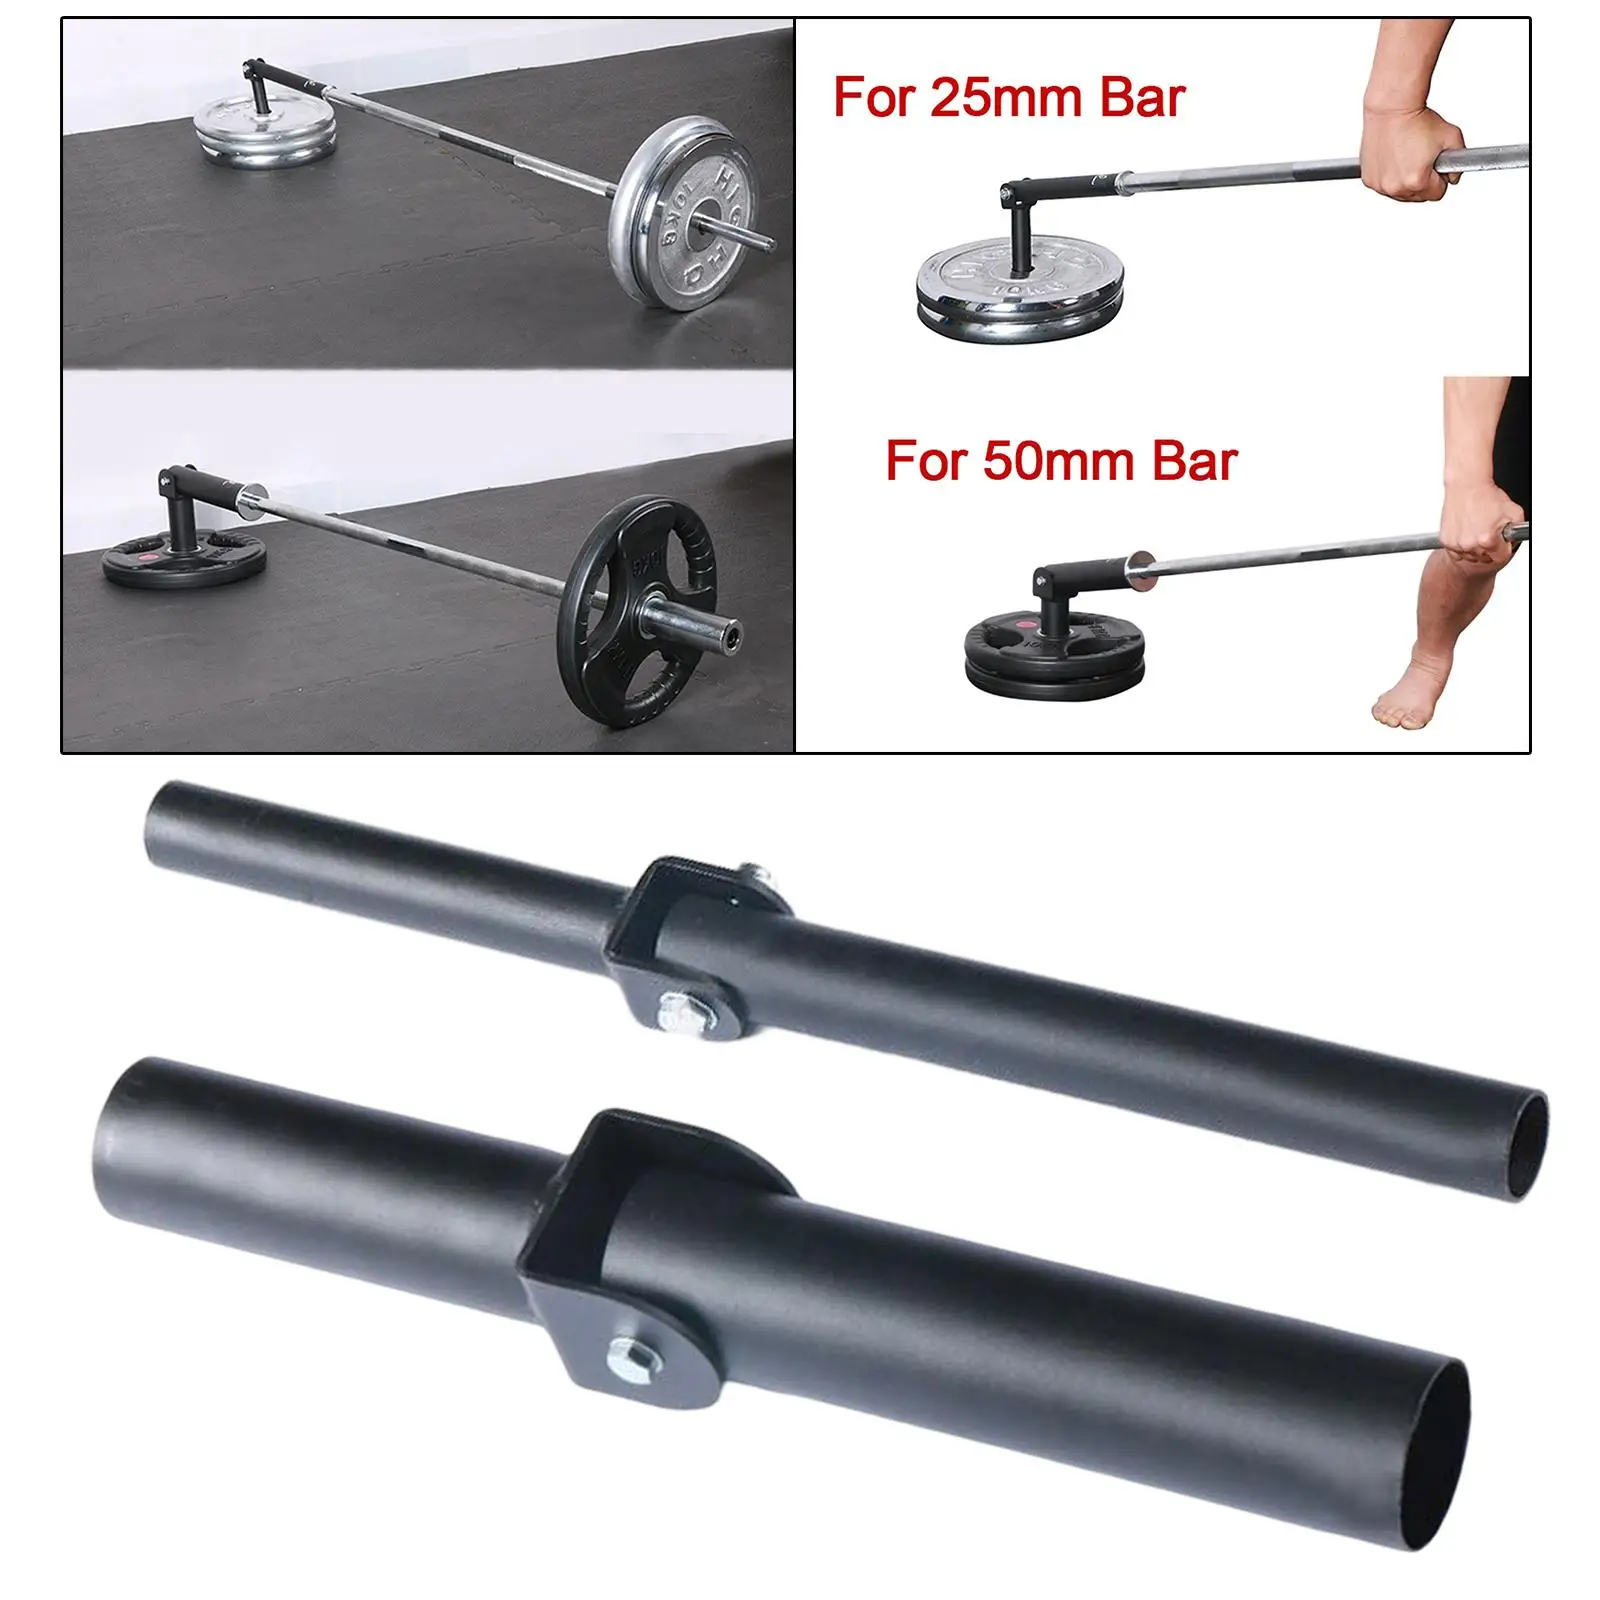 T Bar Row Plate Post Insert Landmine Barbell Attachment Easy to Install Weight Plate Holders Gym Equipment for Exercises Gym